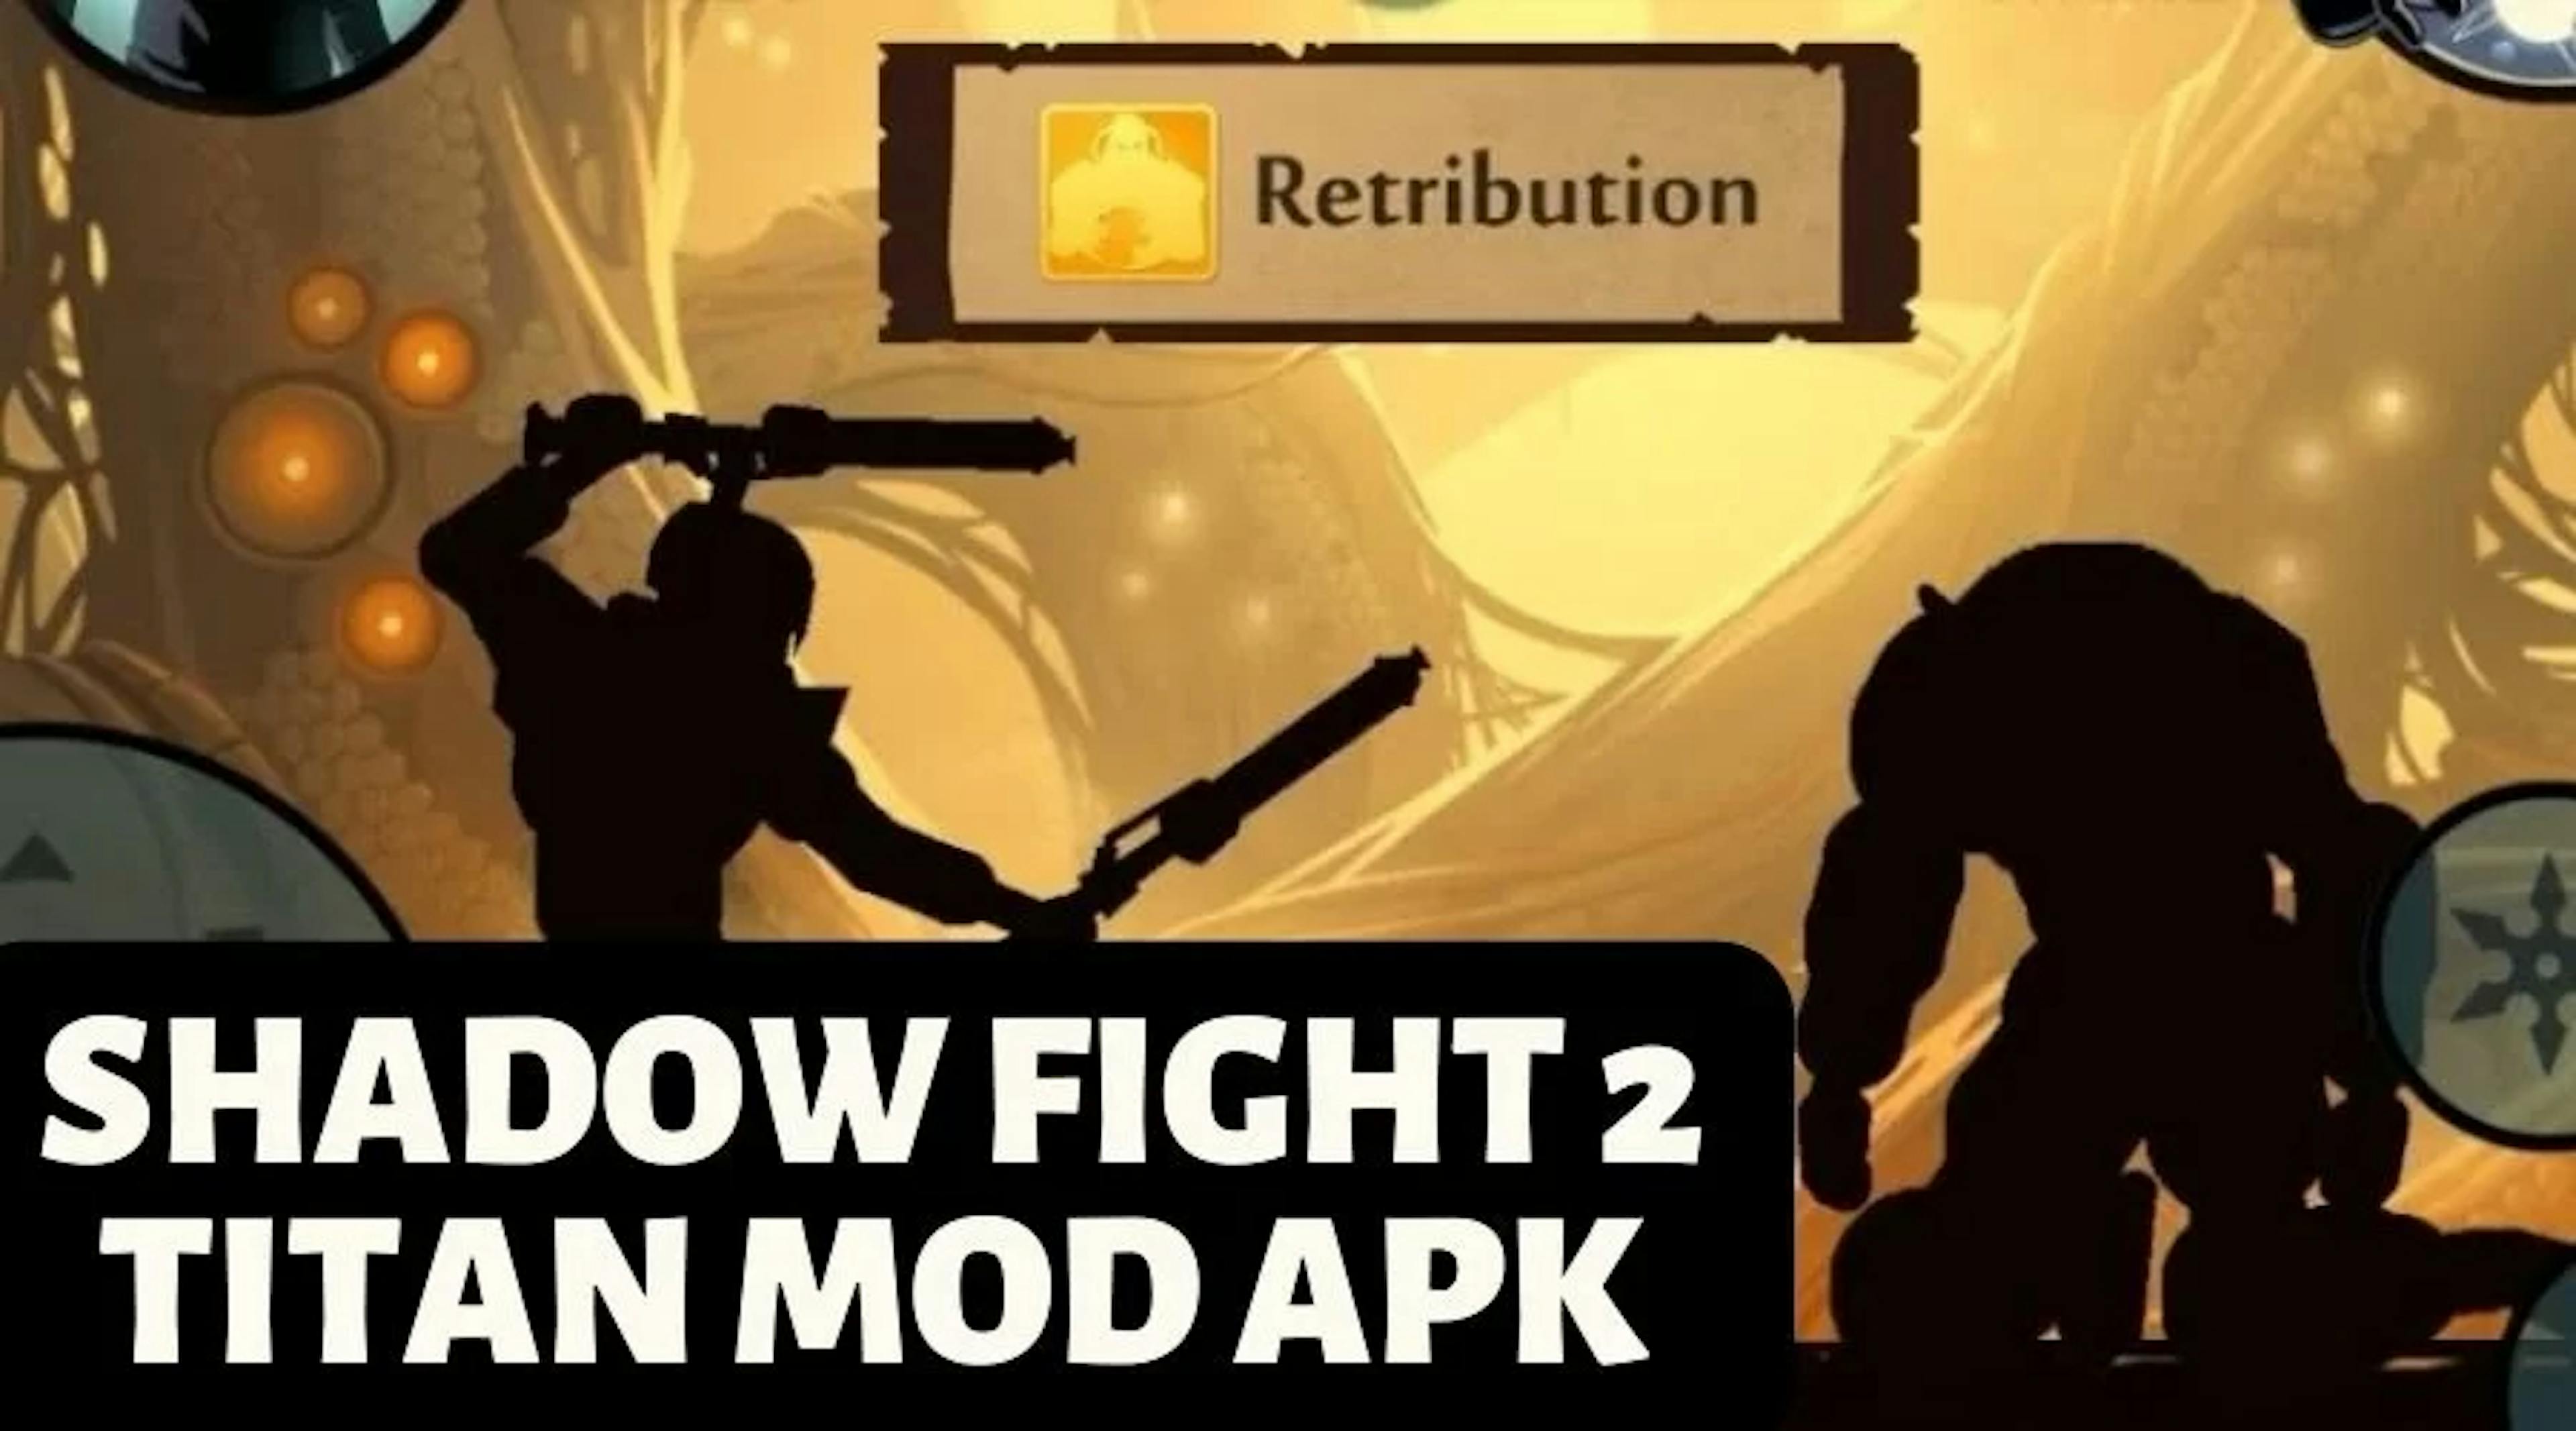 /shadow-fight-2-titan-mod-apk-review feature image